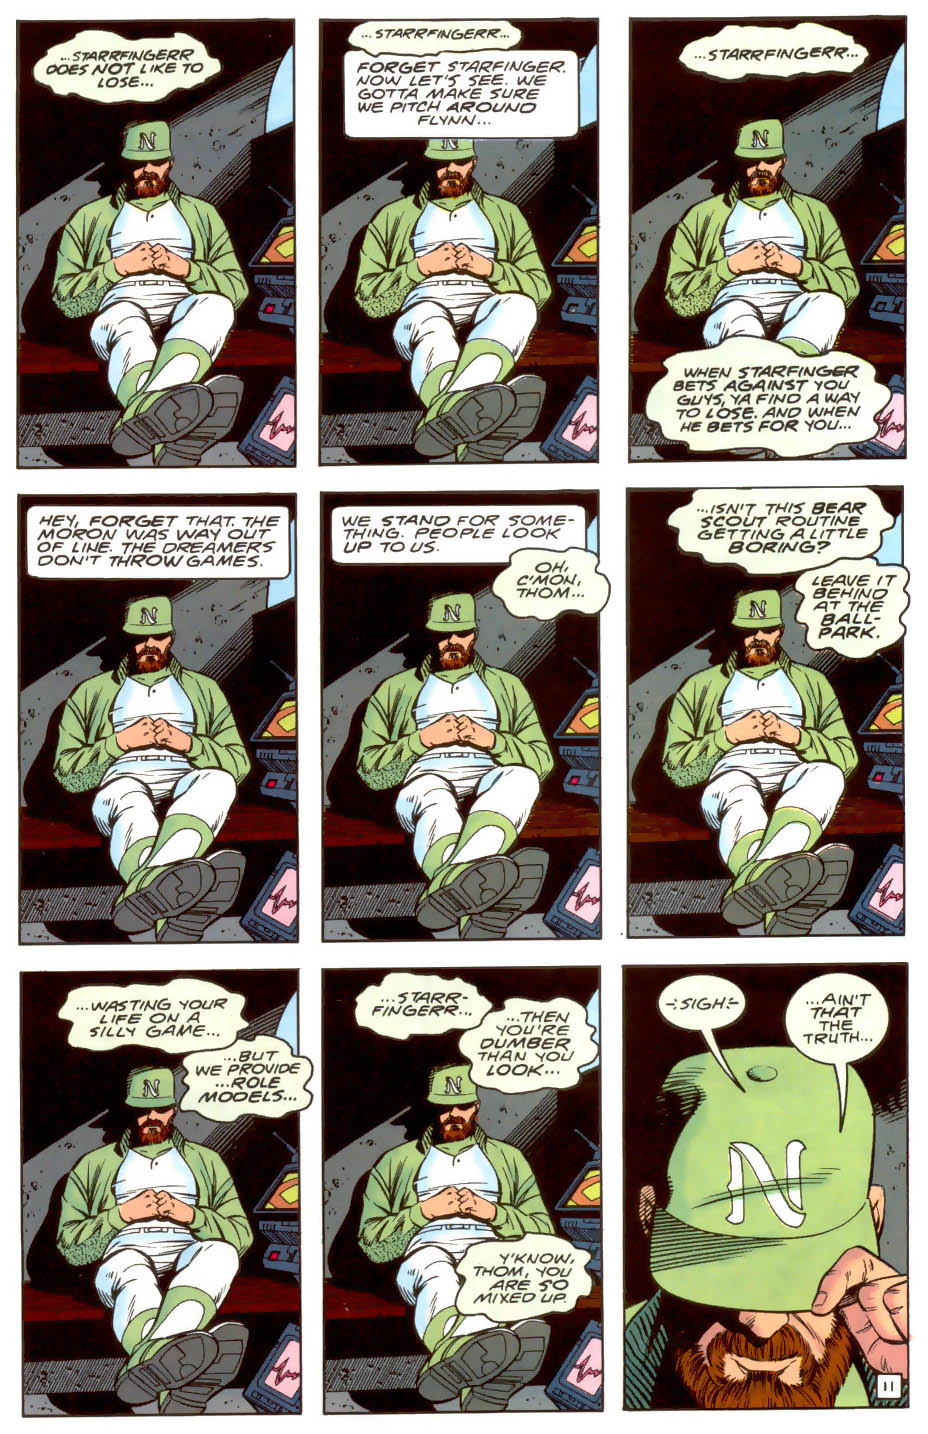 Legion of Super-Heroes (1989) 37 Page 11